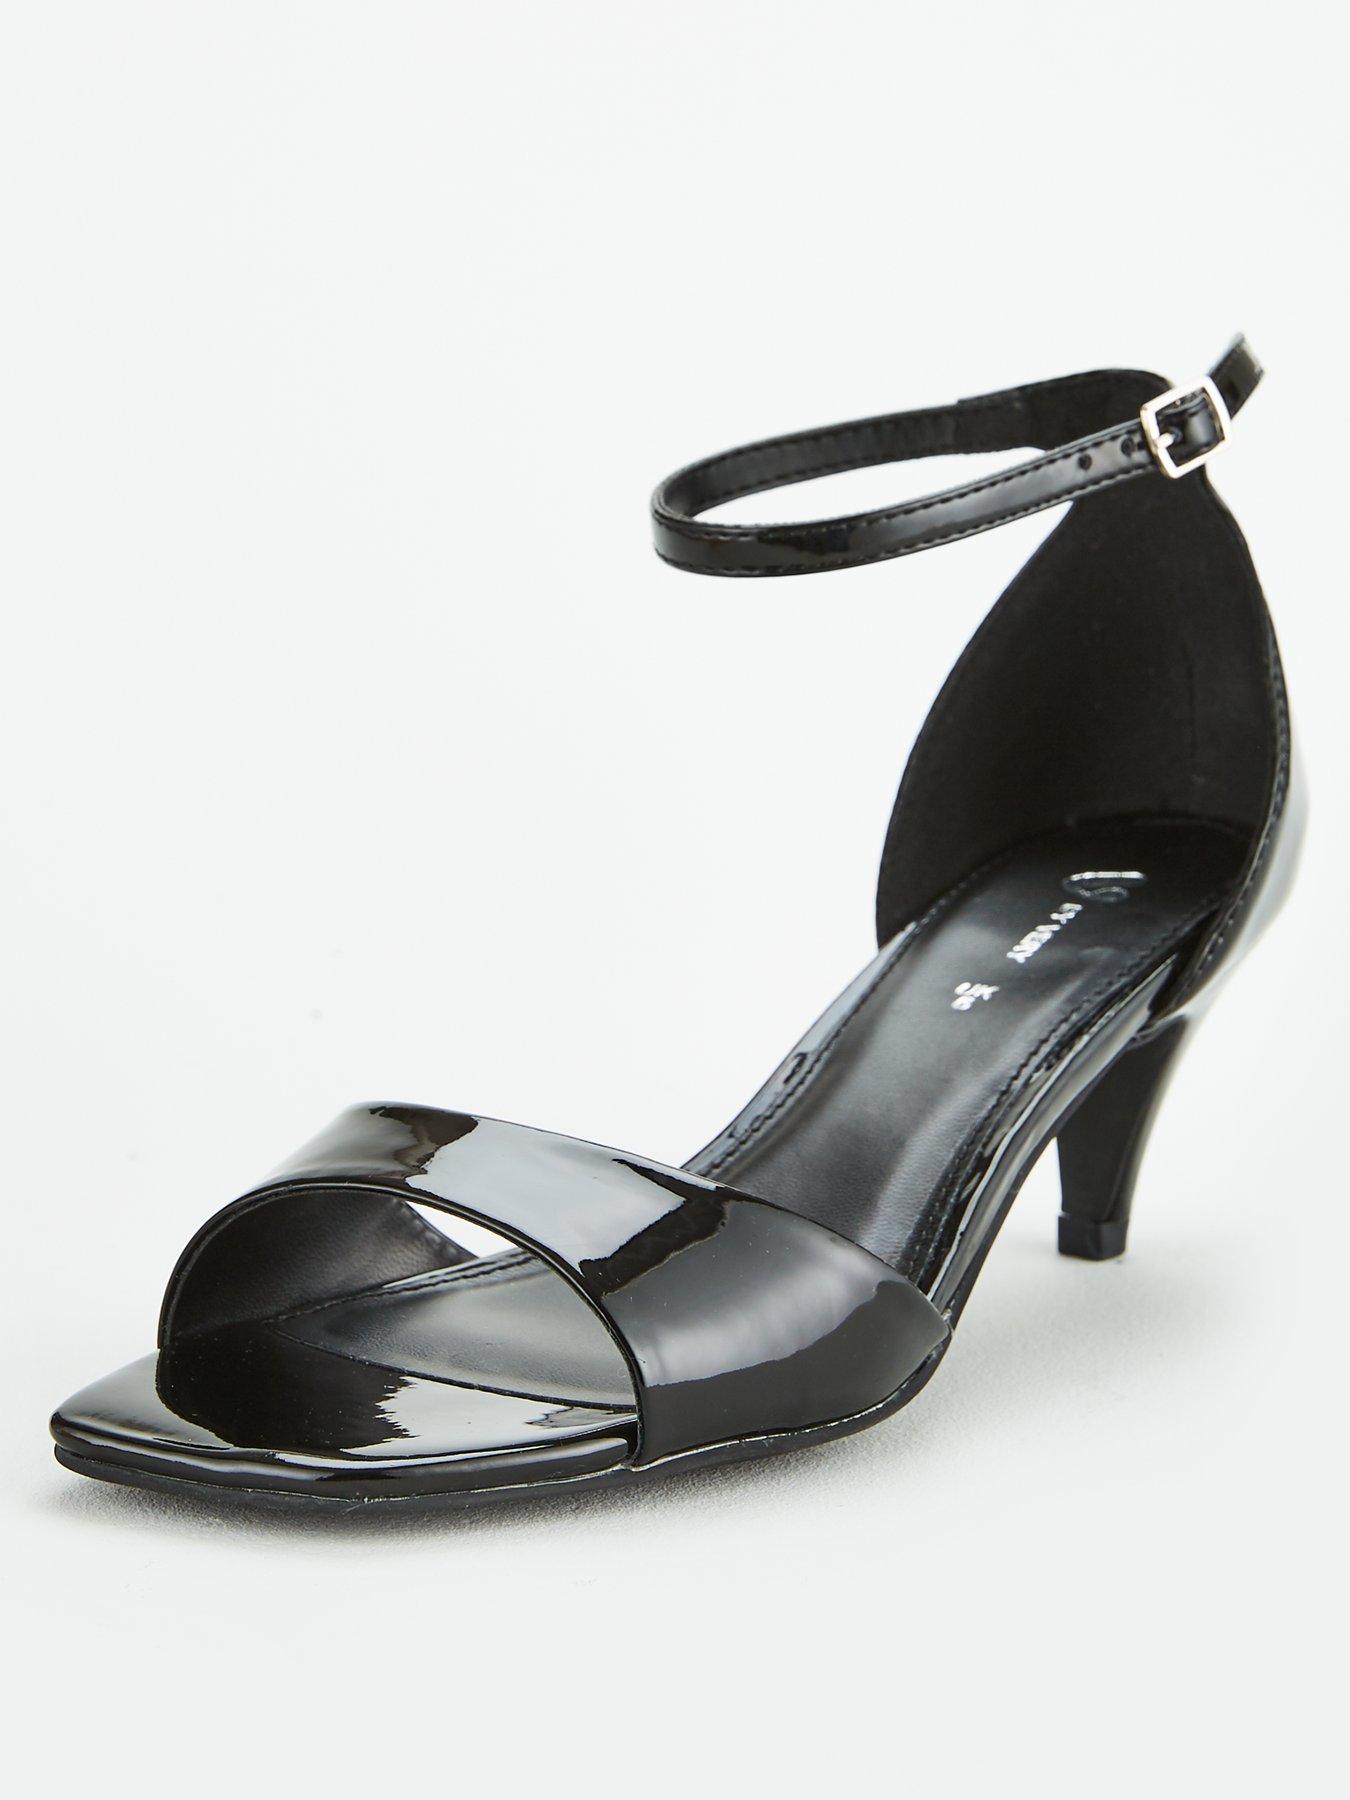 black barely there sandals uk